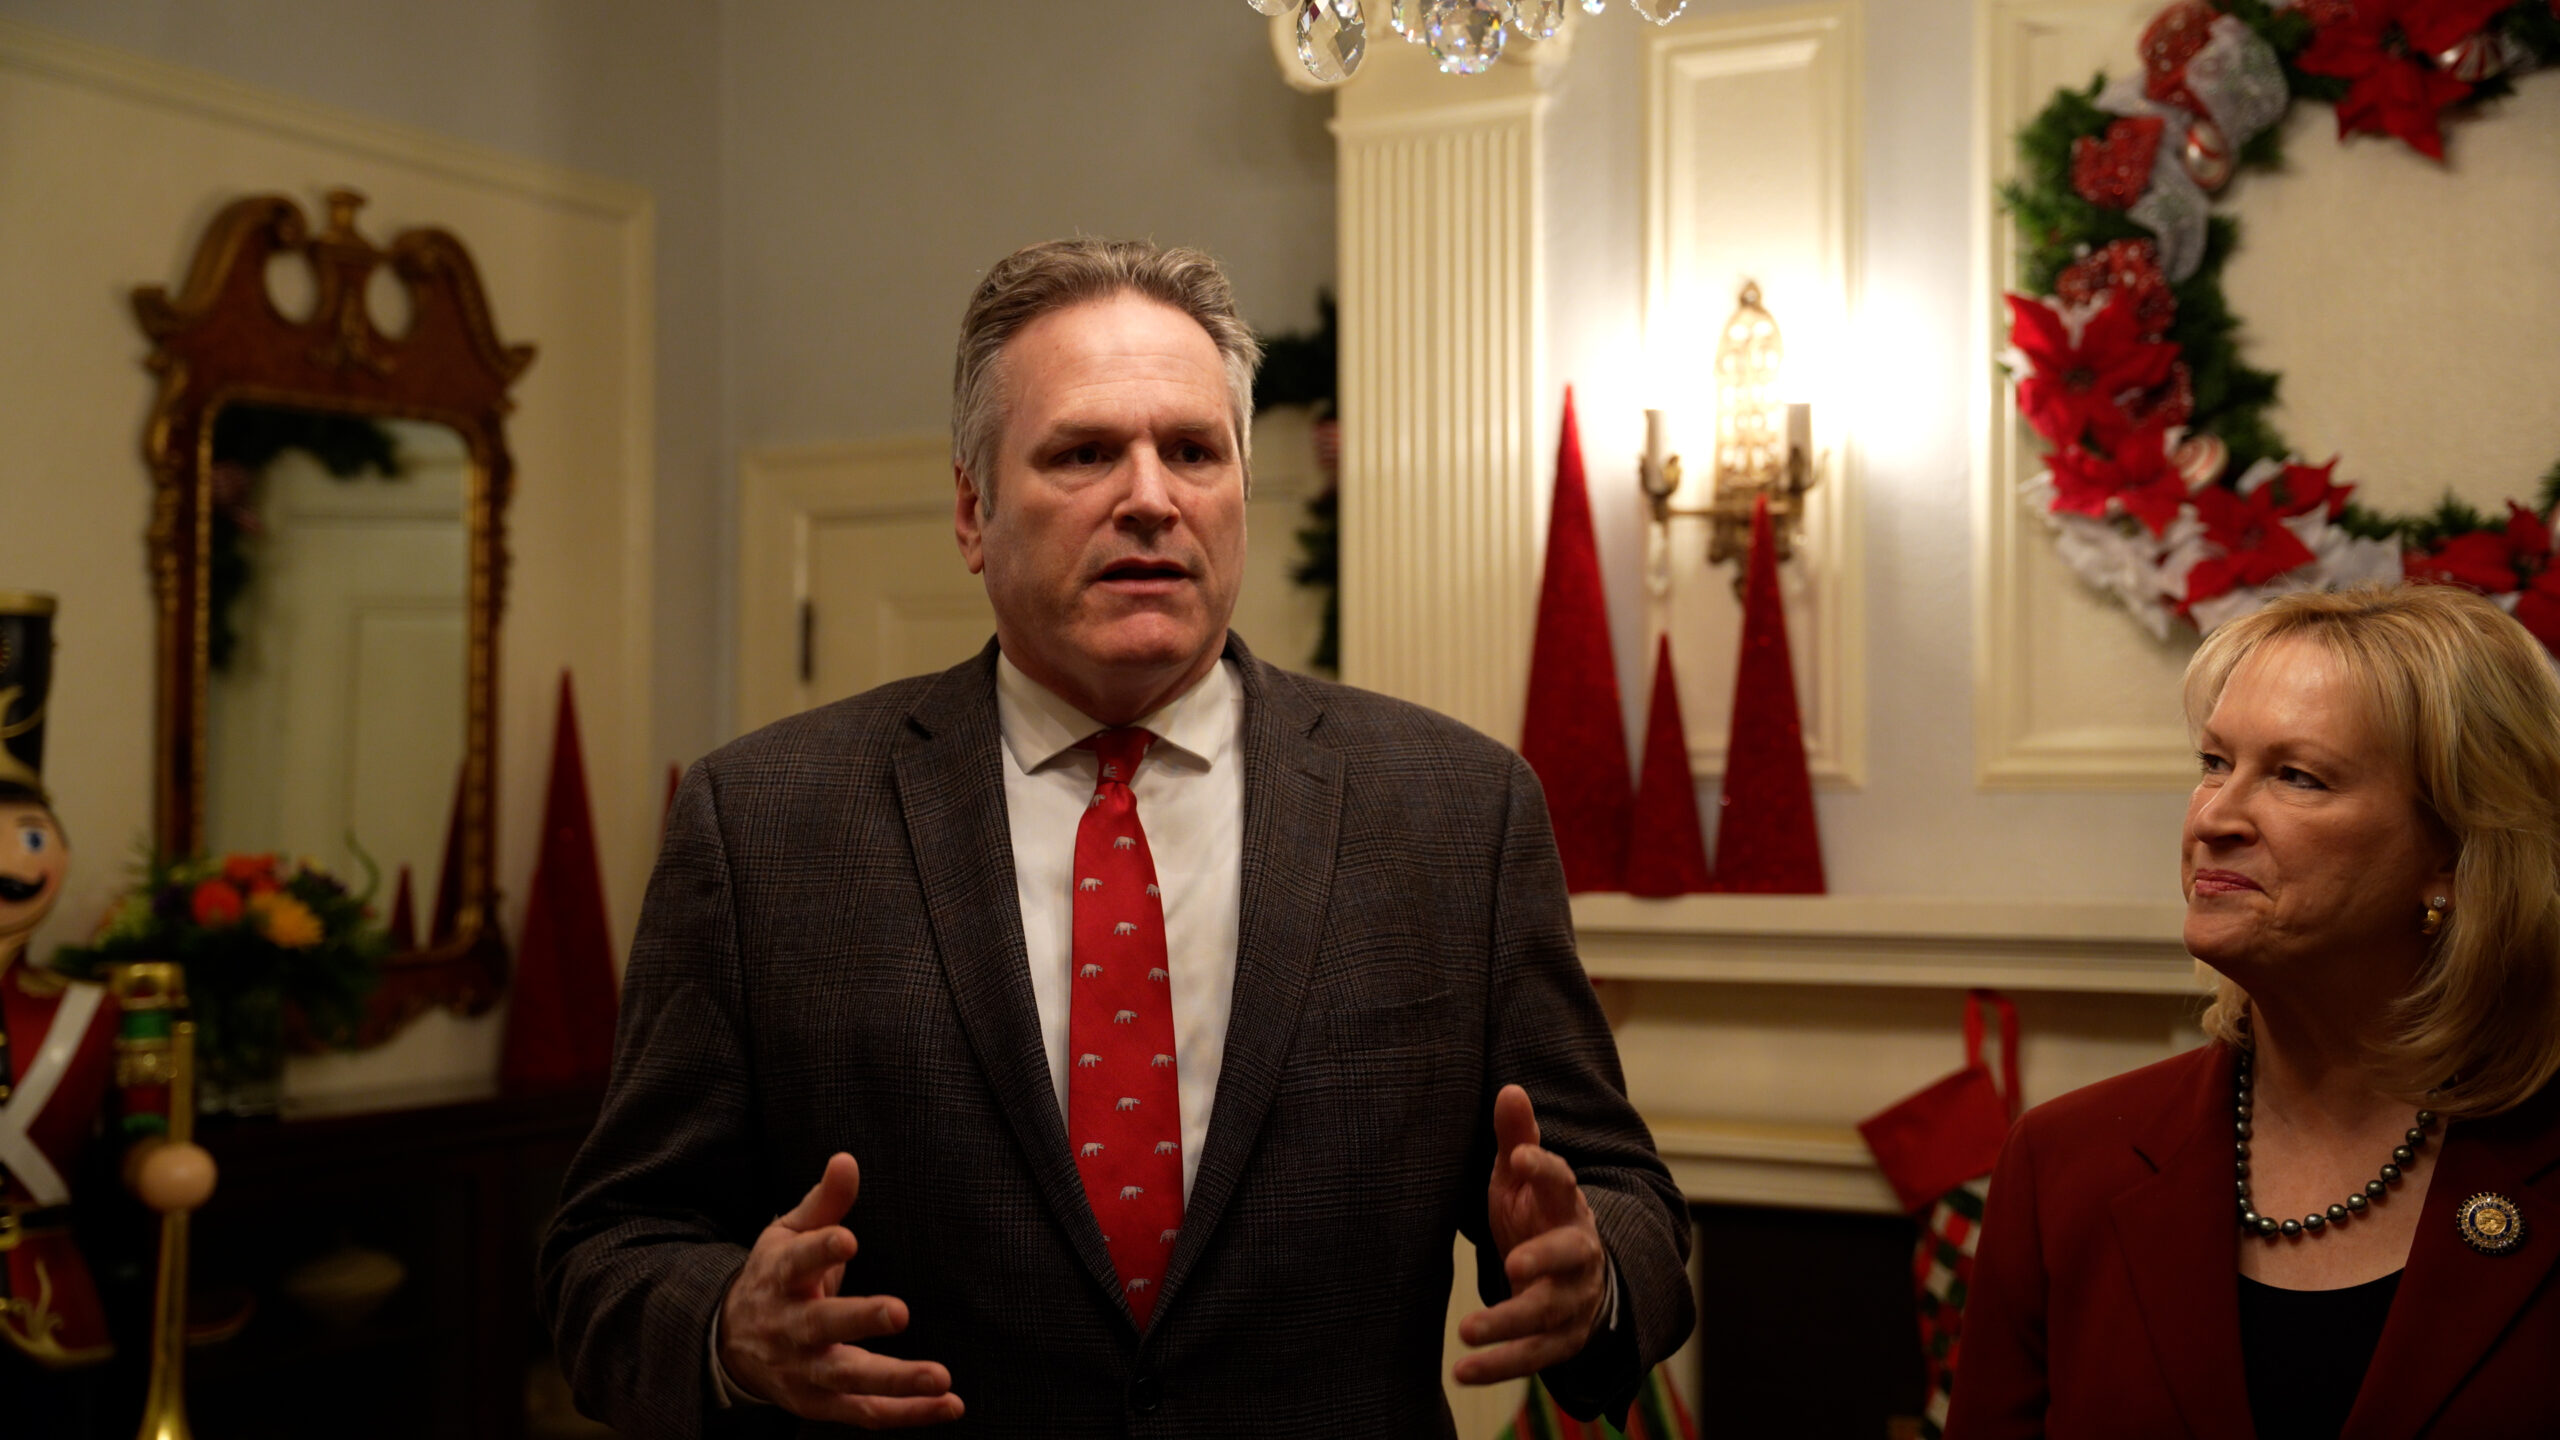 Governor Dunleavy gesturing while speaking